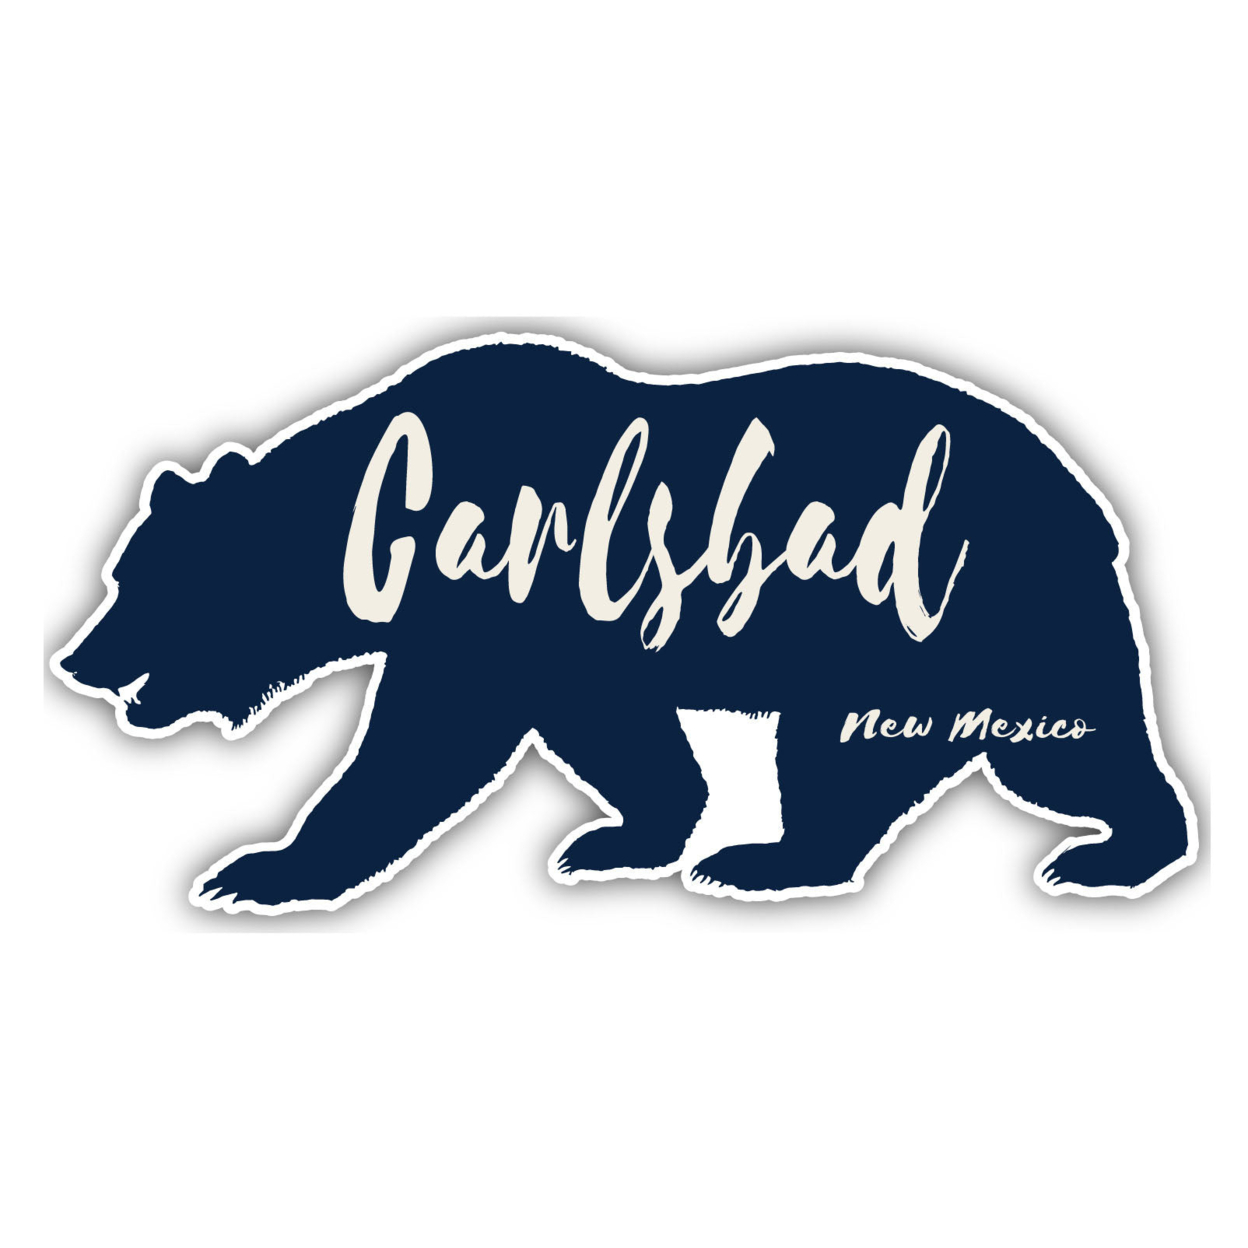 Carlsbad New Mexico Souvenir Decorative Stickers (Choose Theme And Size) - Single Unit, 6-Inch, Great Outdoors